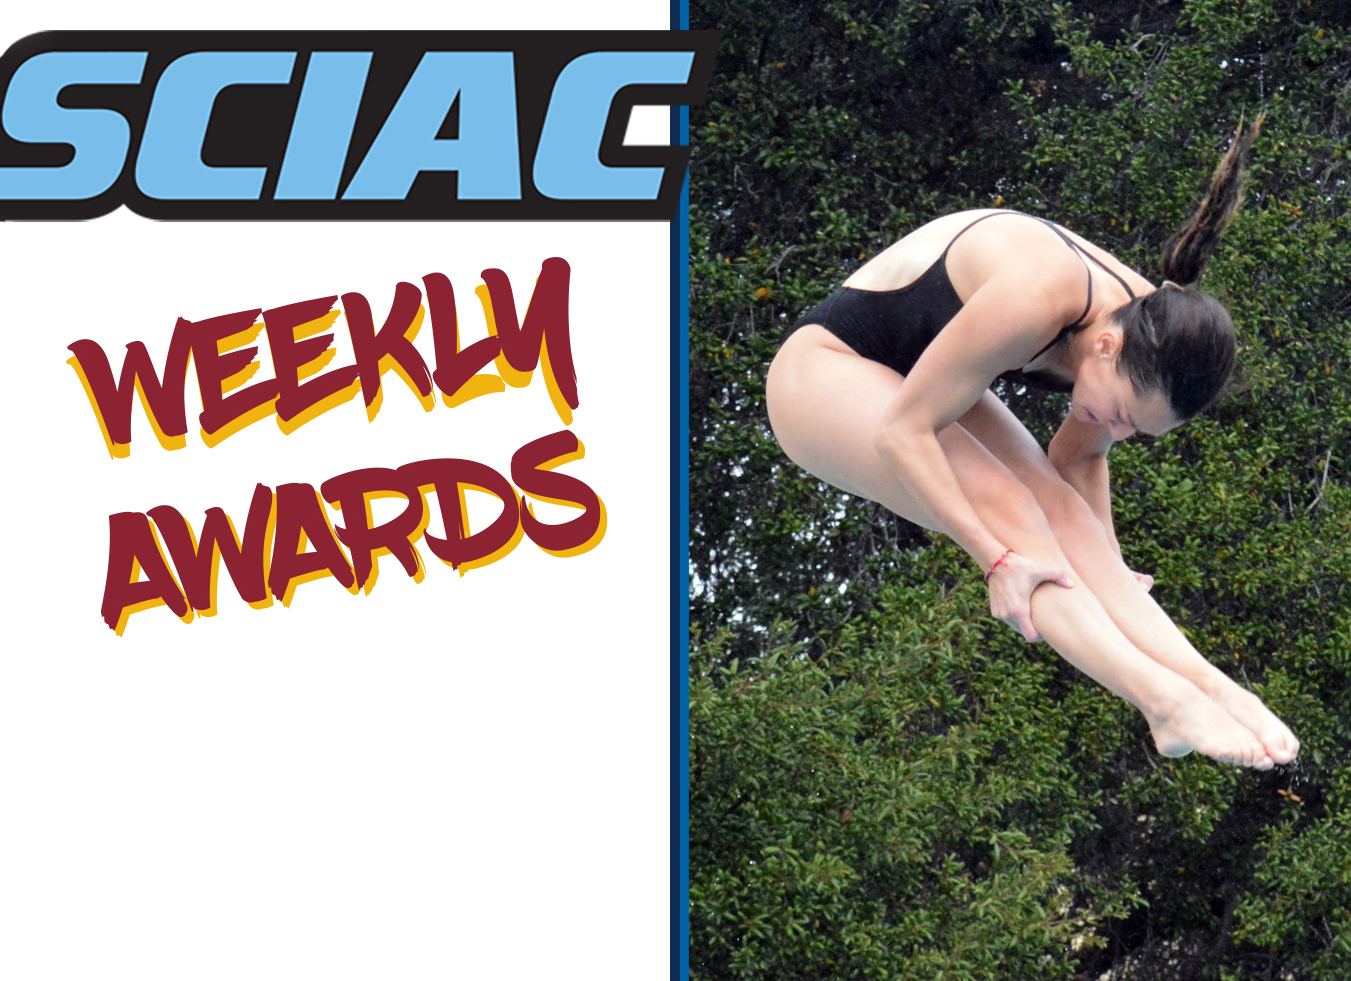 A logo that says 'SCIAC Weekly Awards' next to a picture of a young white woman diving.